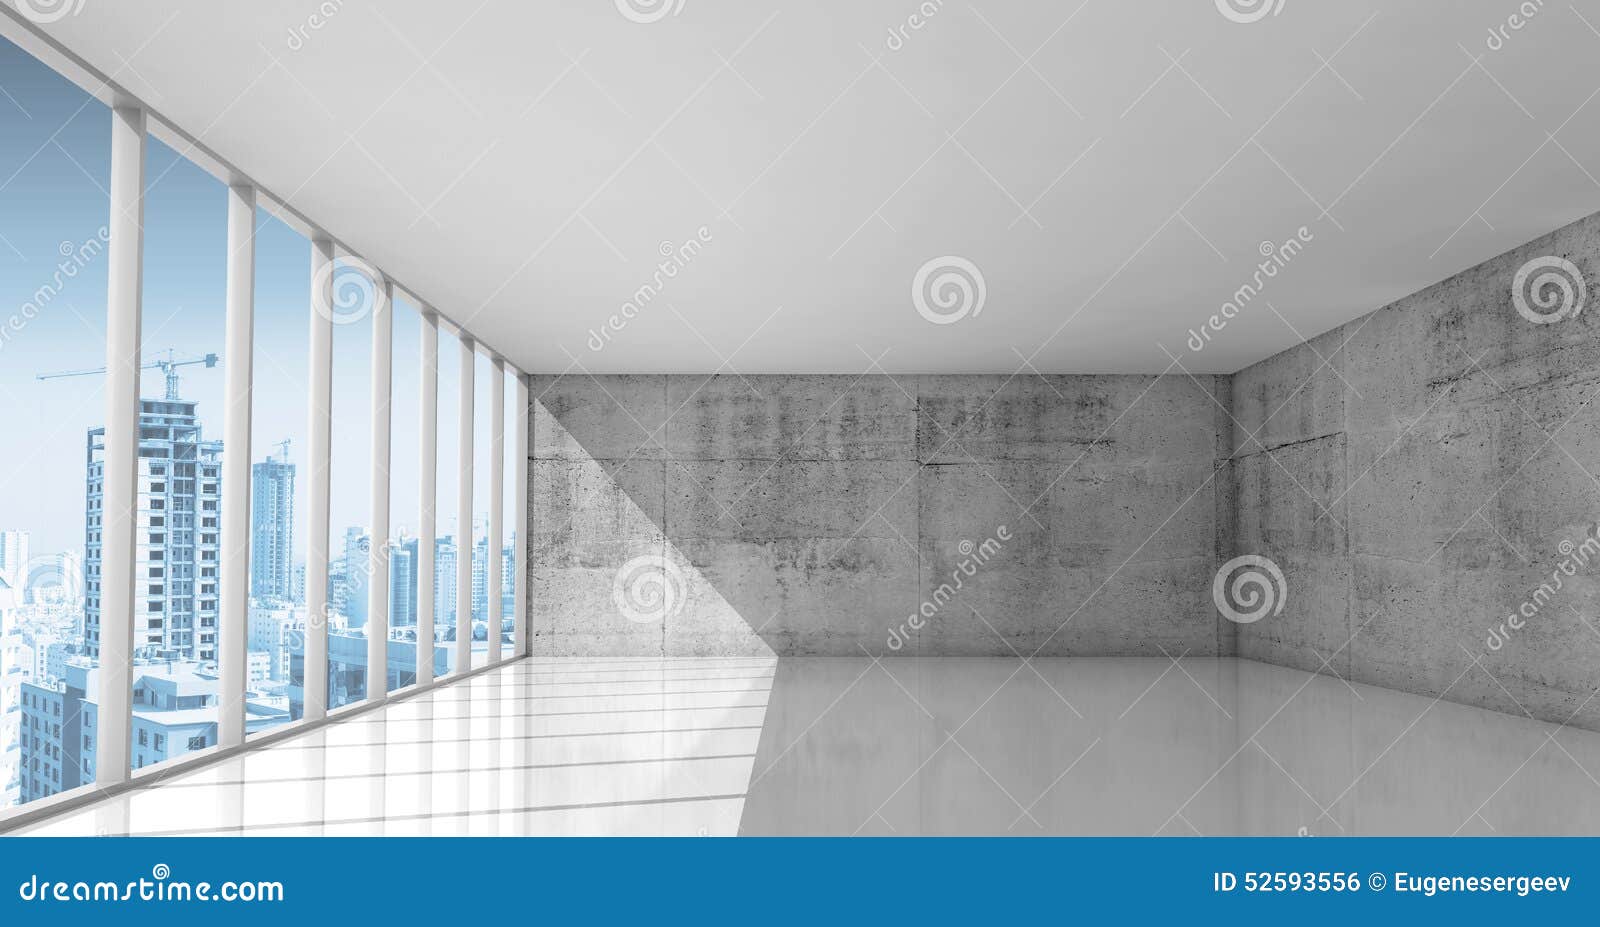 Abstract Architecture Empty Interior With Concrete Walls